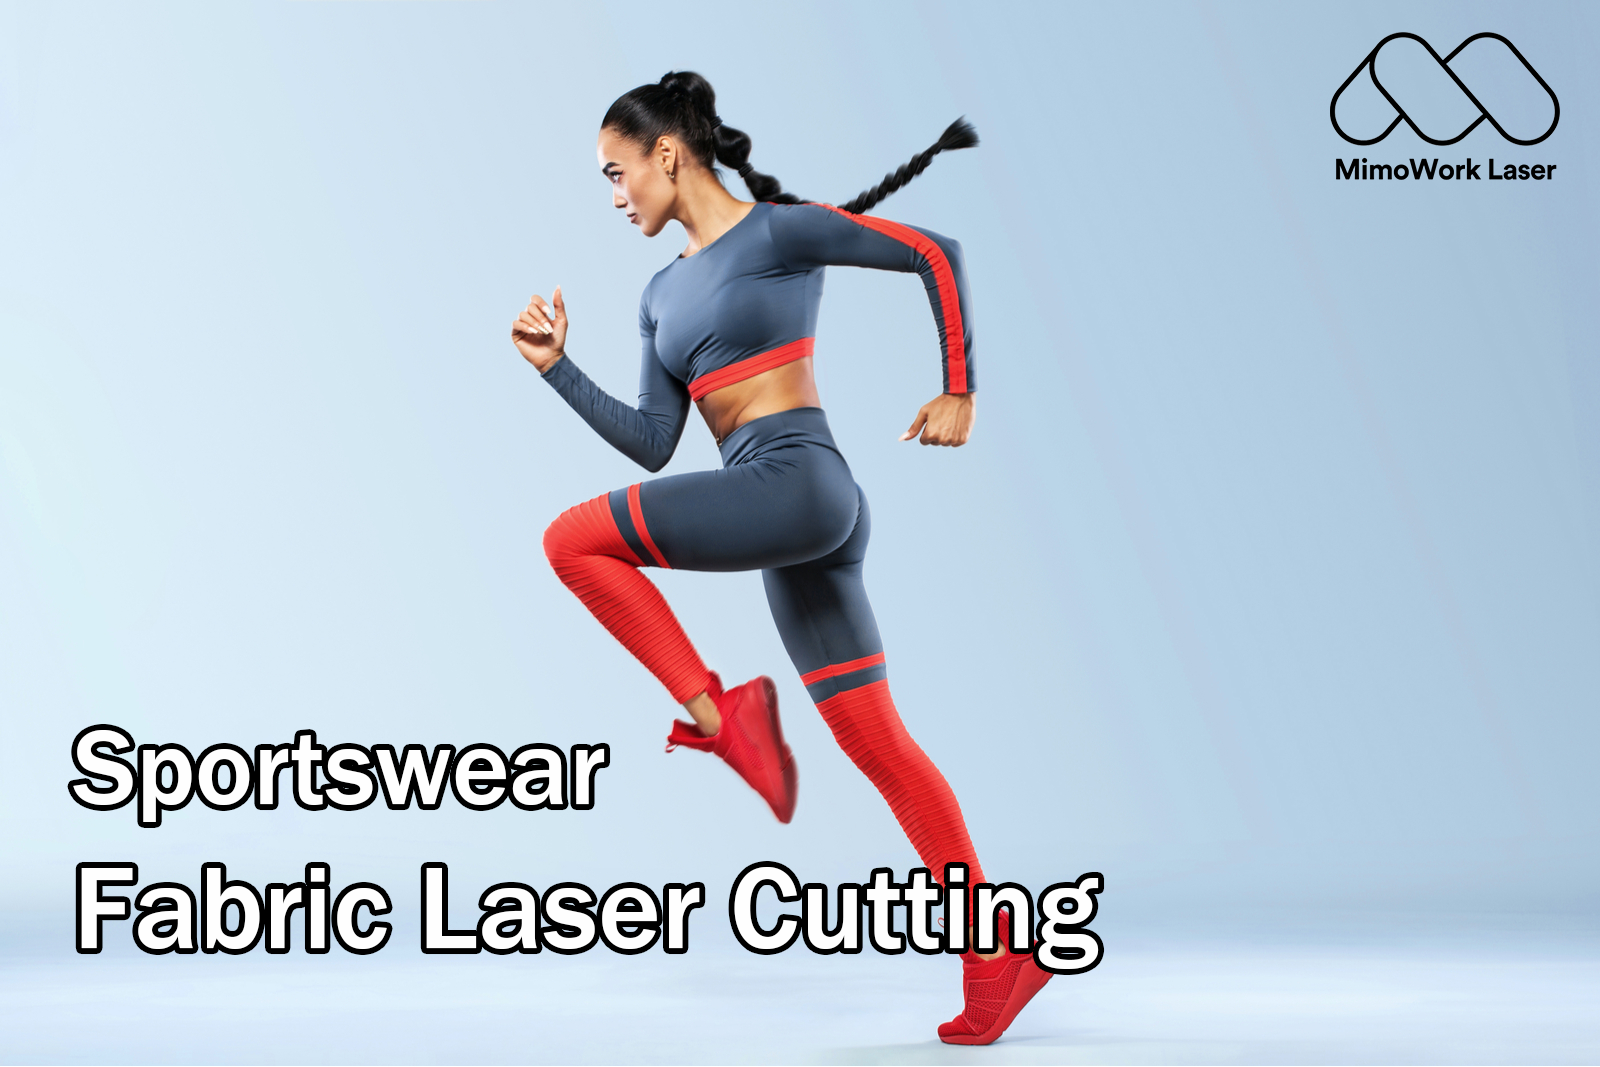 Innovations in Fabric Laser Cutting for Sportswear